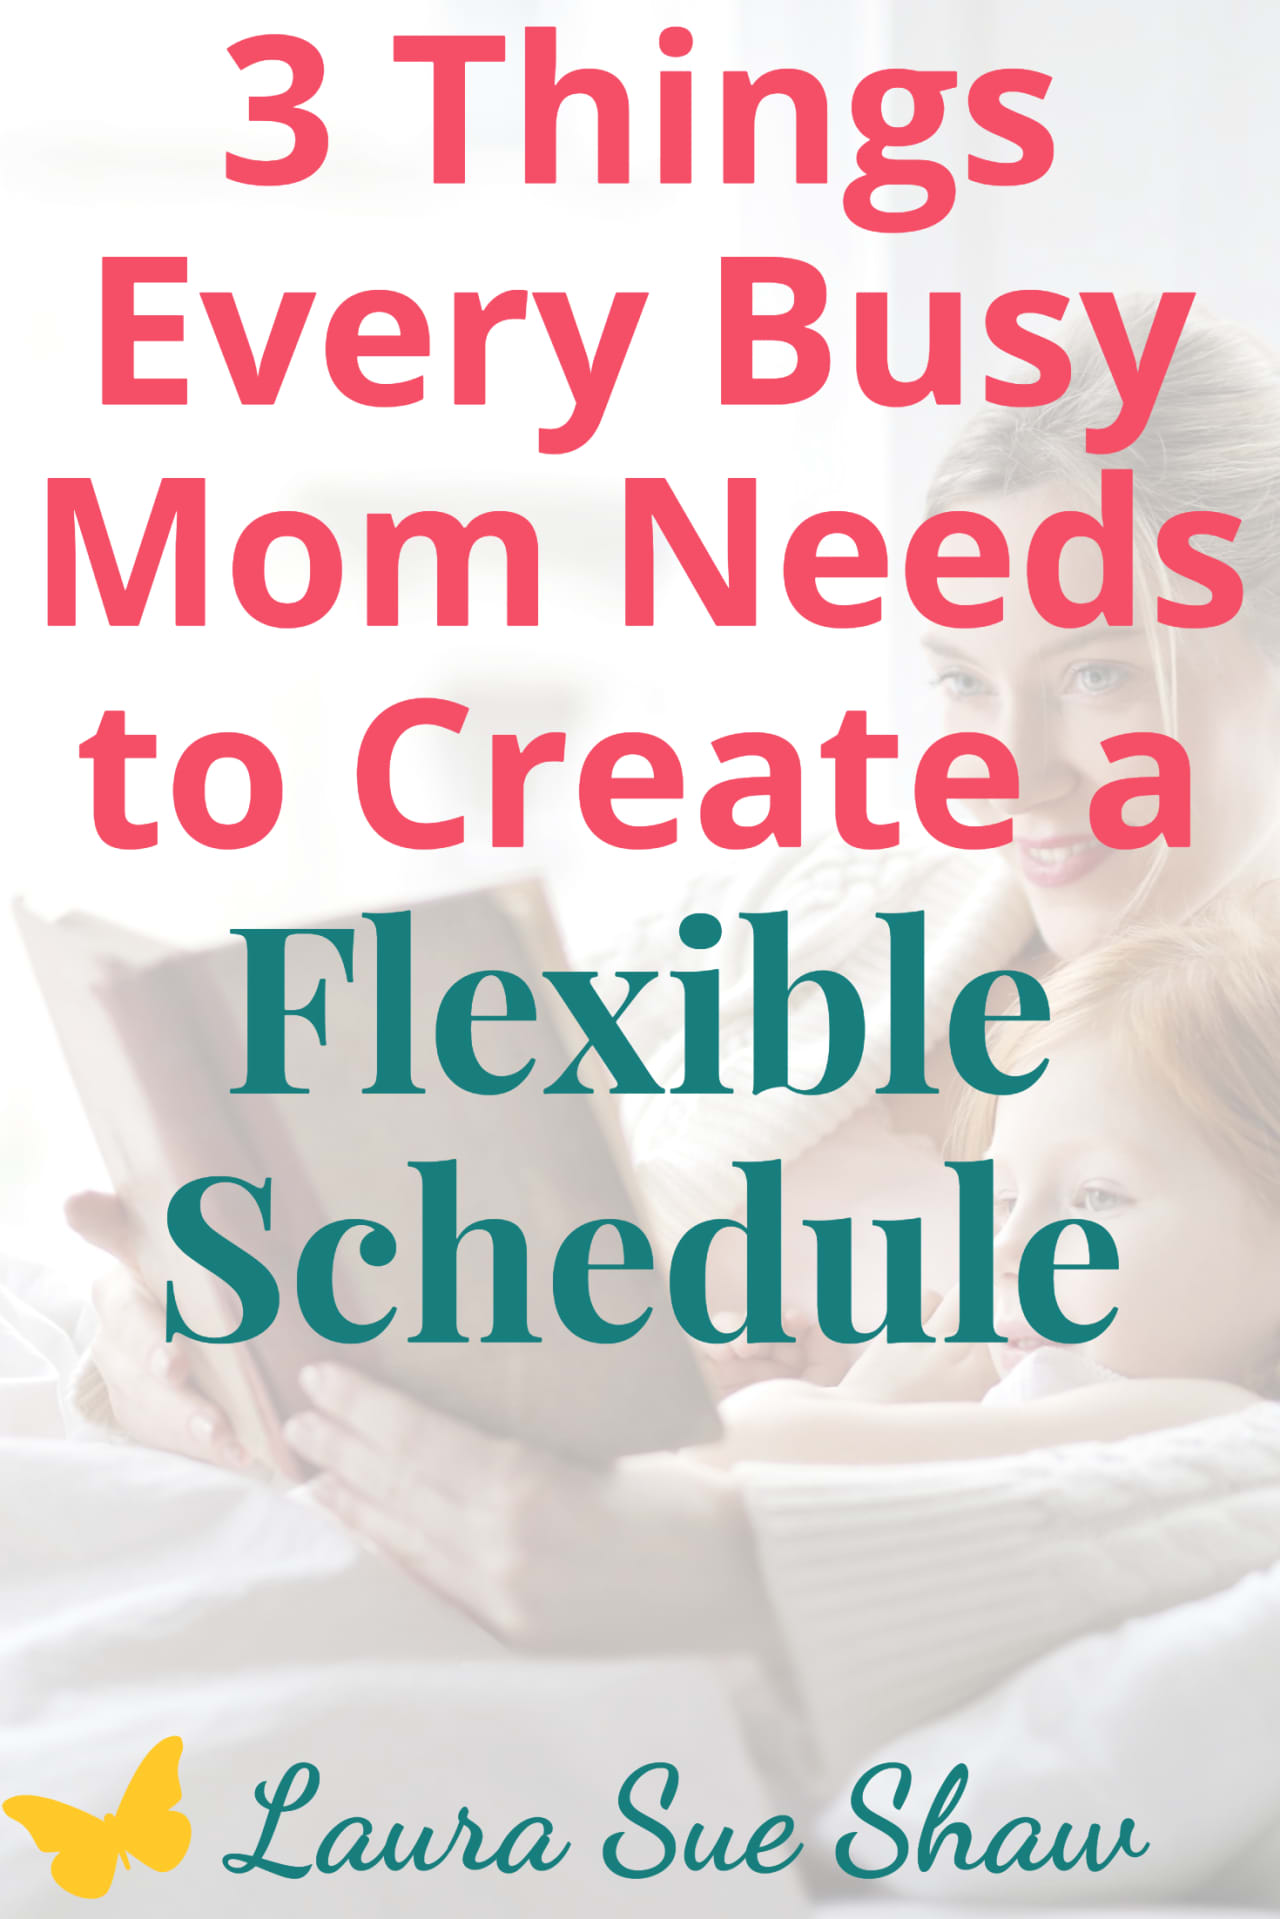 3 Things Every Busy Mom Needs to Create a Flexible Schedule